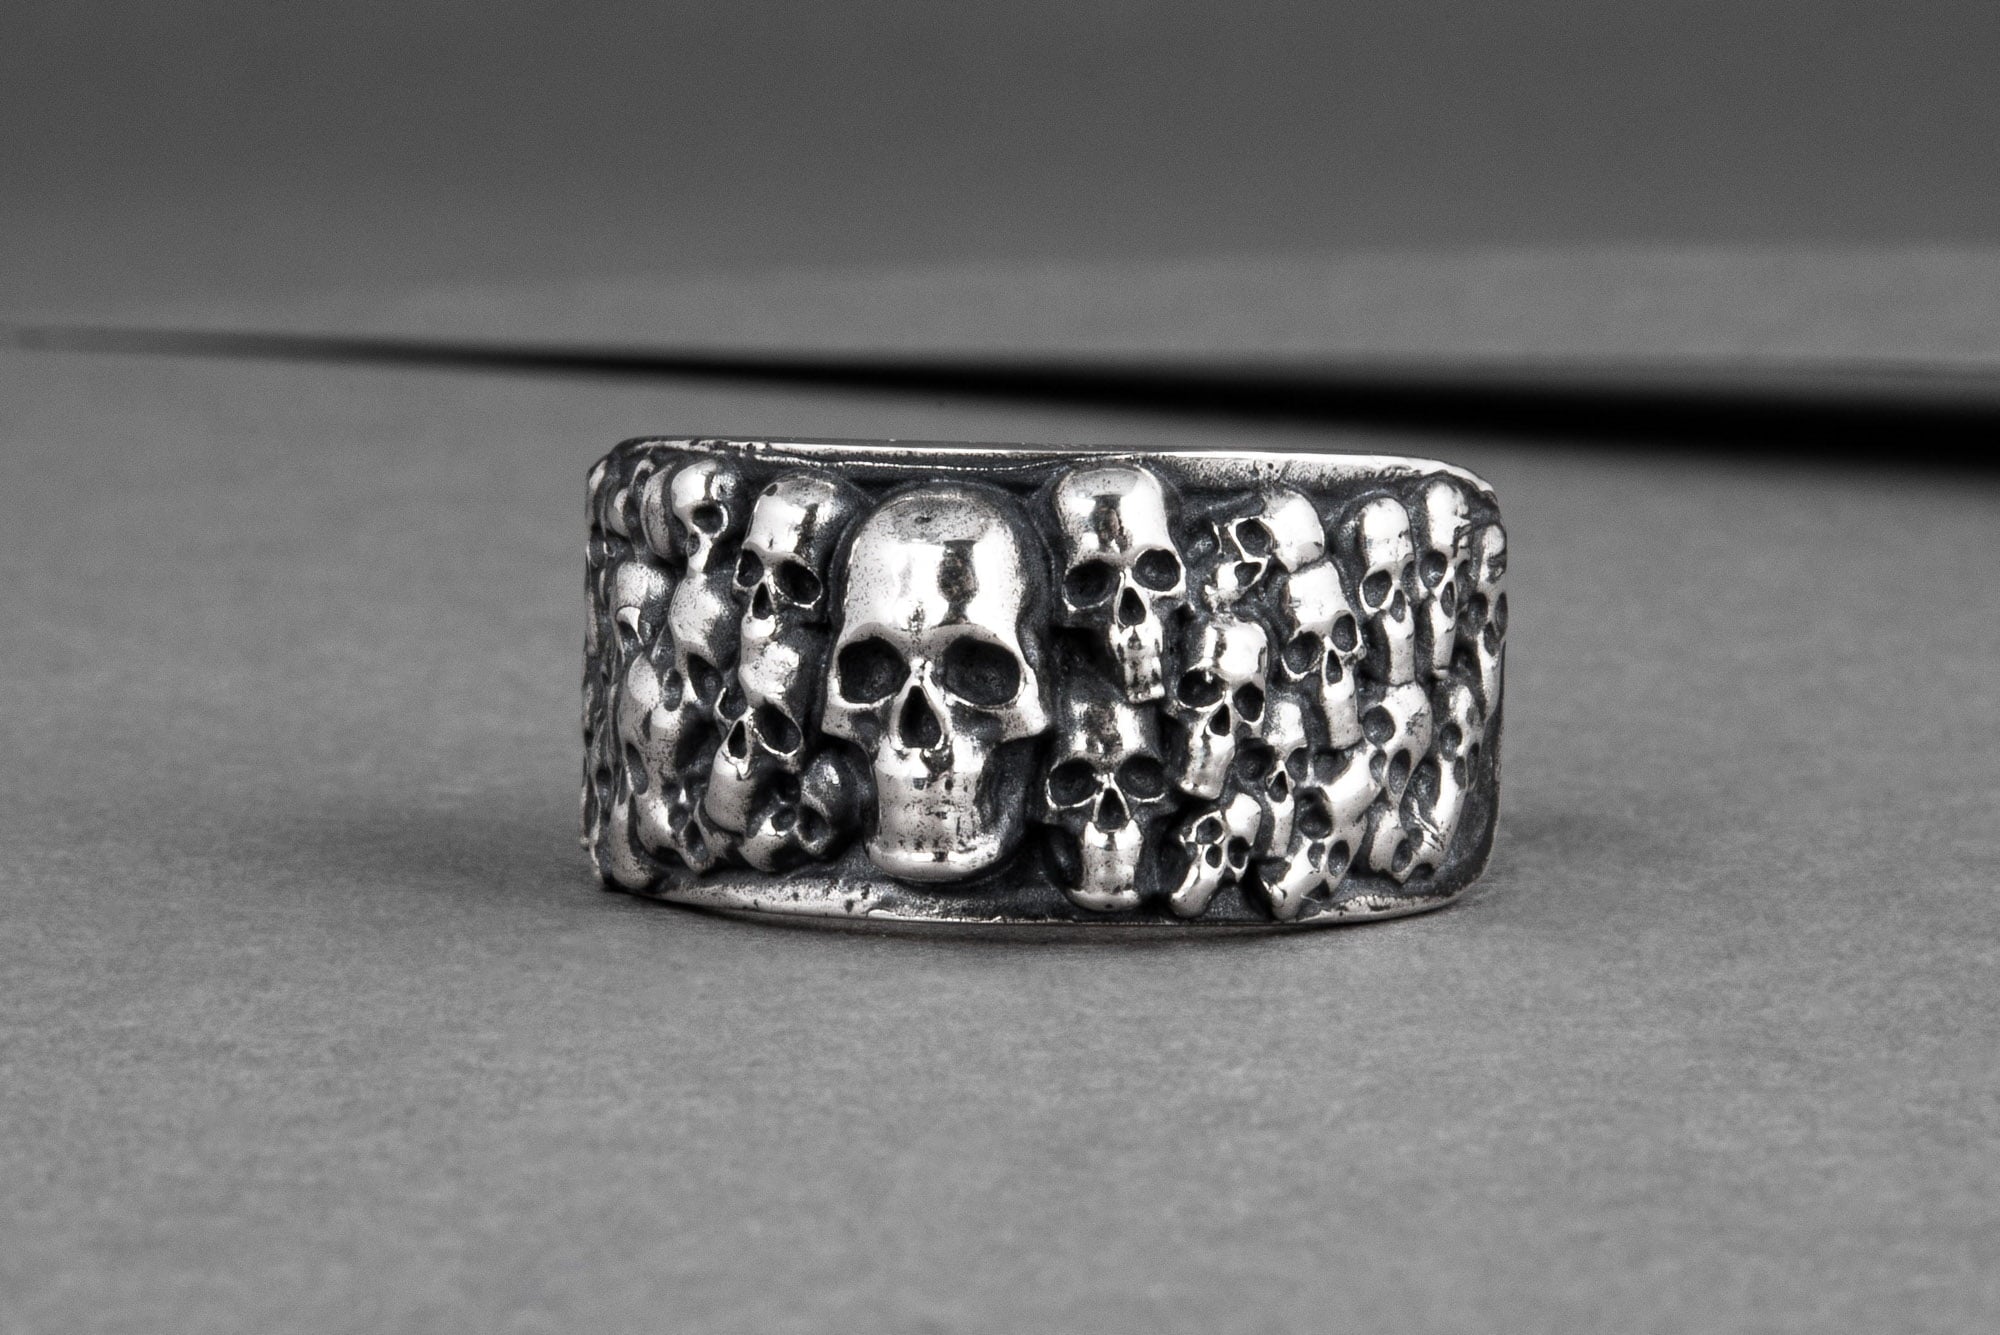 Ring with Skulls Sterling Silver Unique Handmade Biker Jewelry